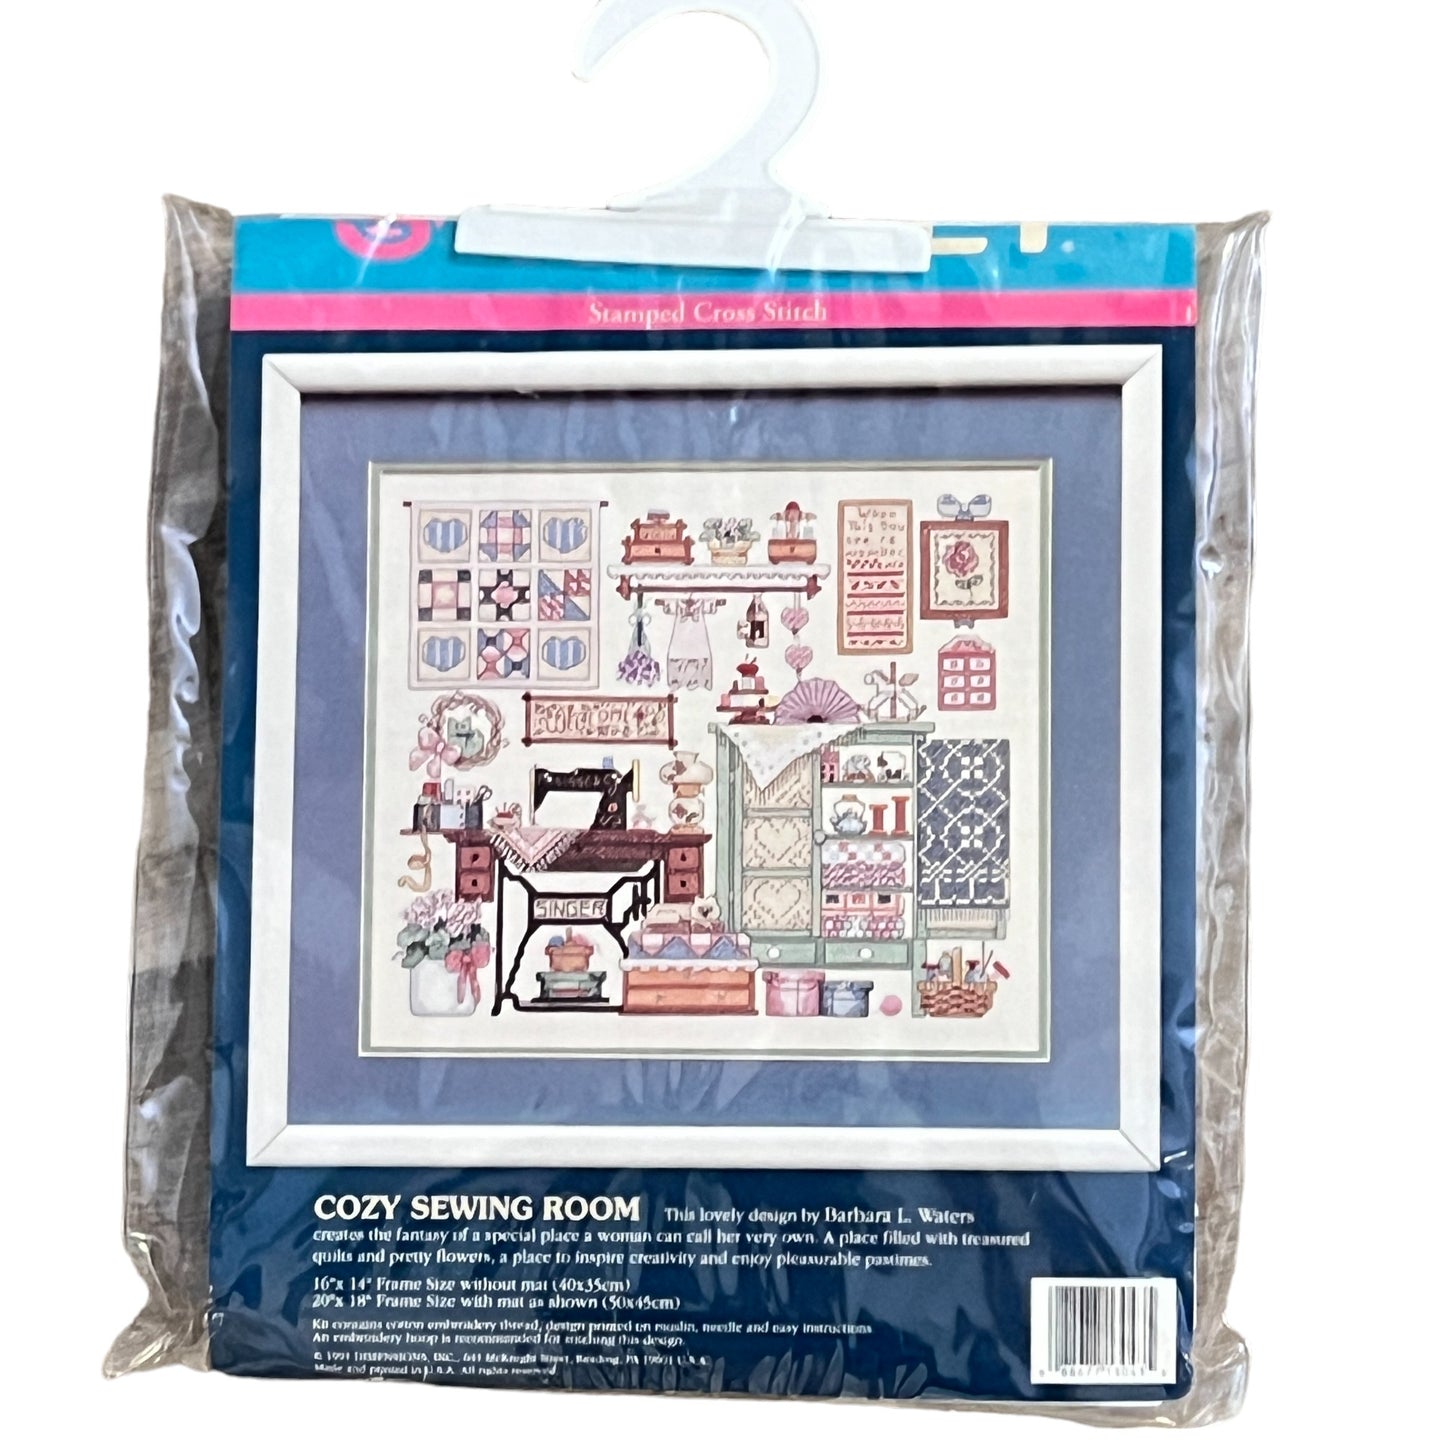 Vintage Sunset COZY SEWING ROOM #13043 Stamped Cross Stitch Kit B Waters